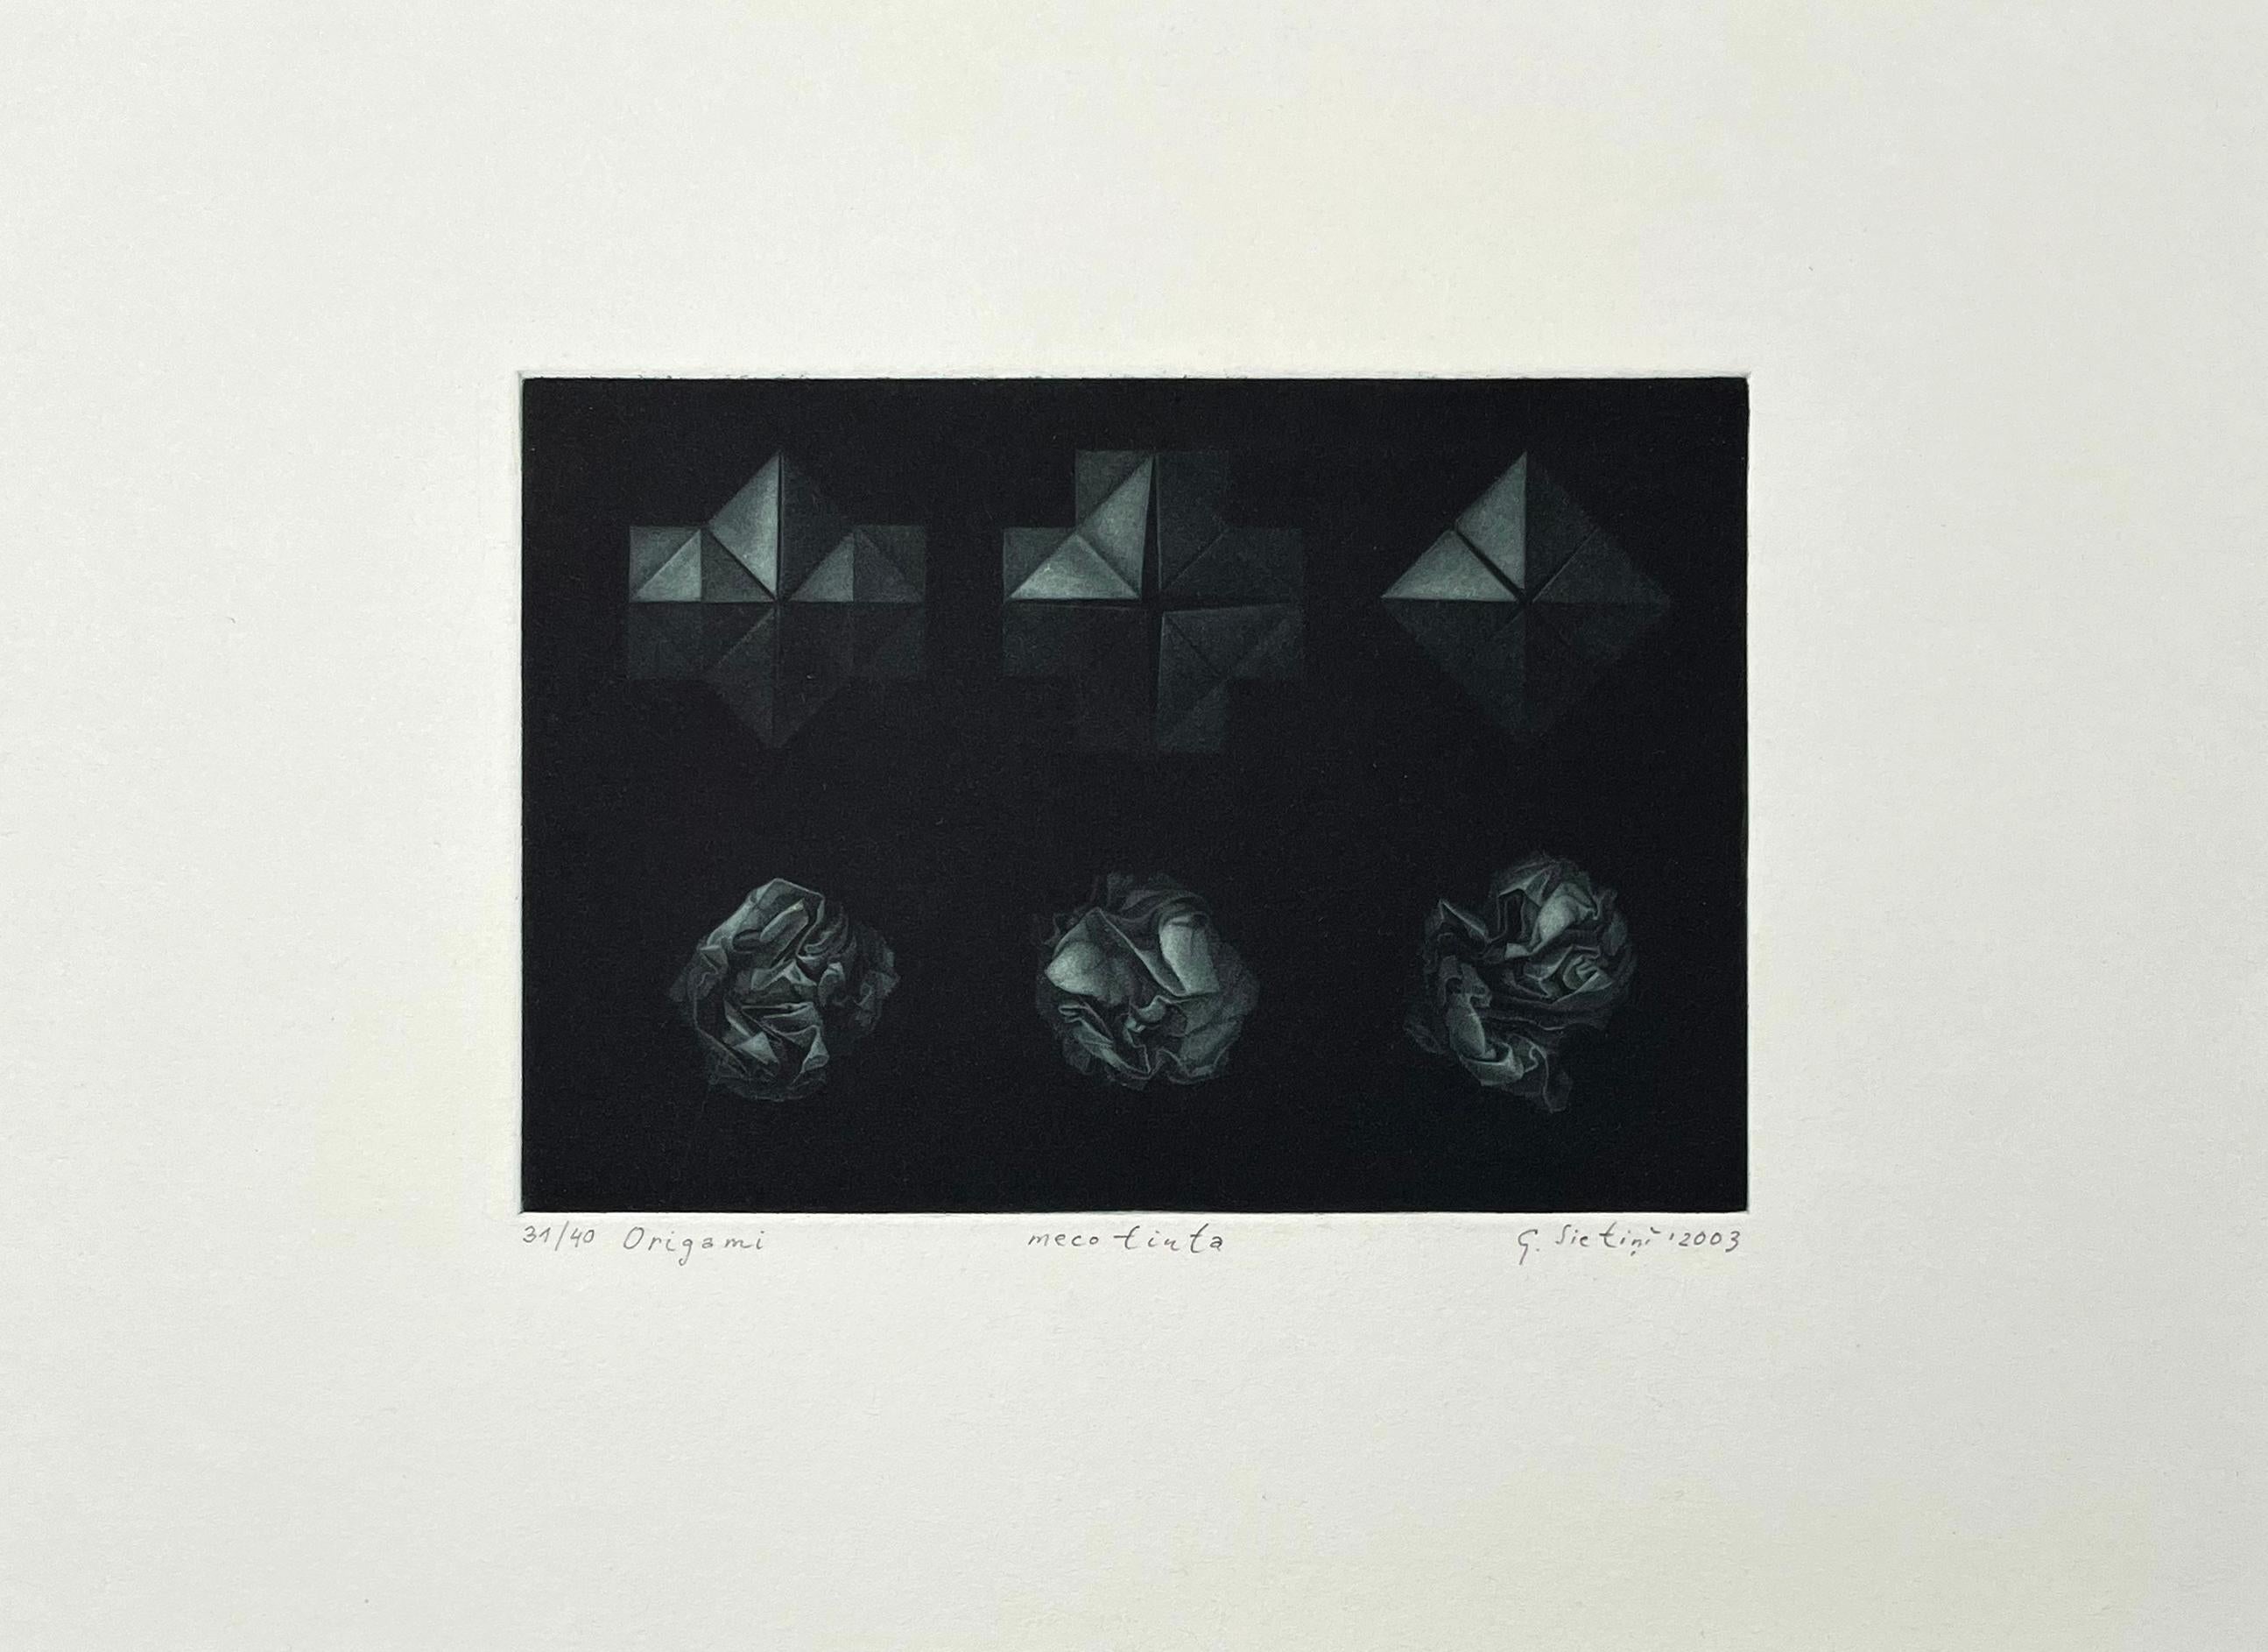 The illusions and reflections in Sietins prints often bring M.C. Escher to mind, but his prints have a distinctive feel all their own. This is one of the smallest prints done by Sietins, a study of light effects on a series of small paper